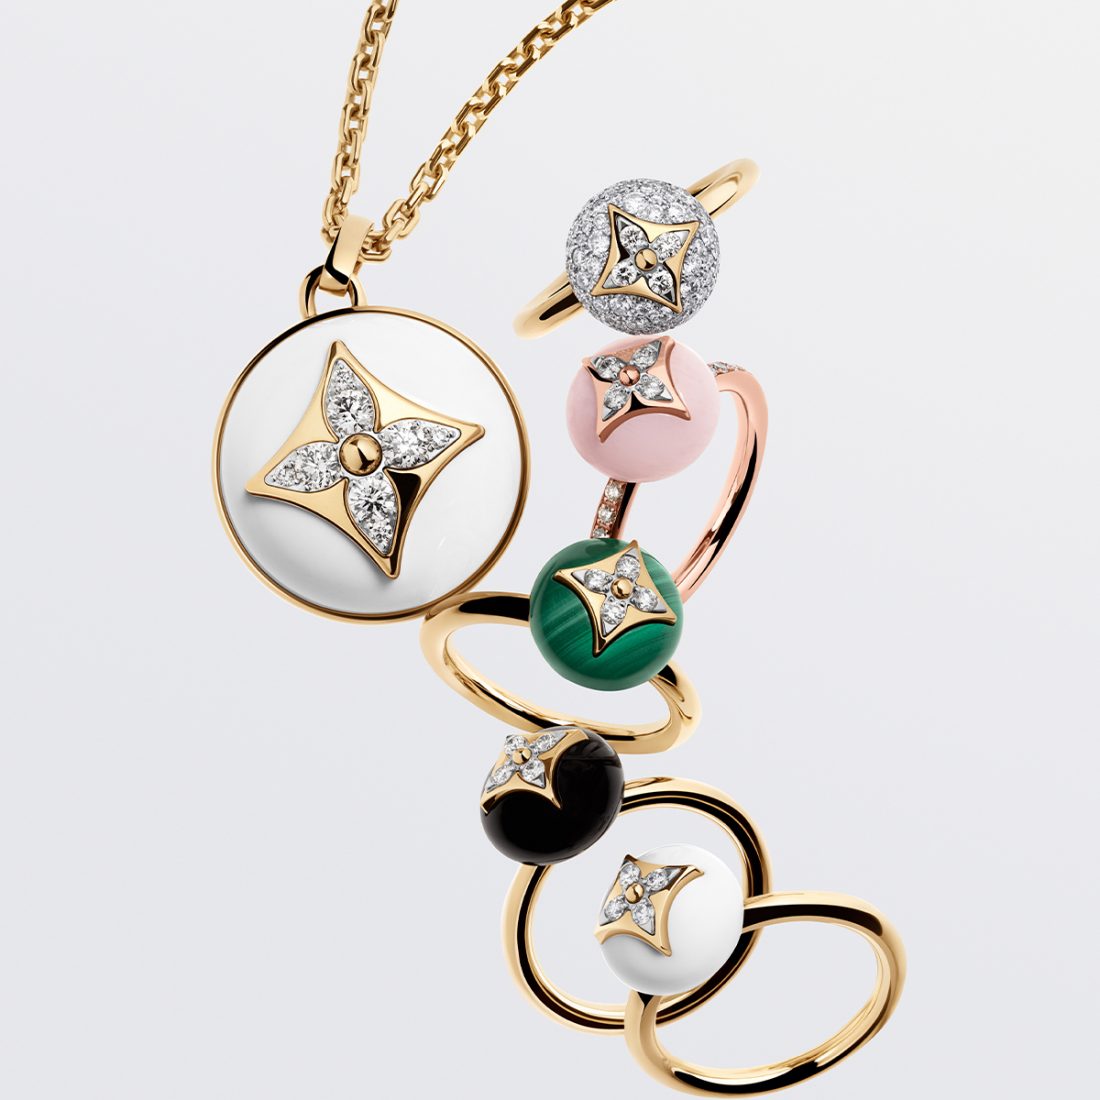 Louis Vuitton's First Fine Jewellery Collection Blossoms This May